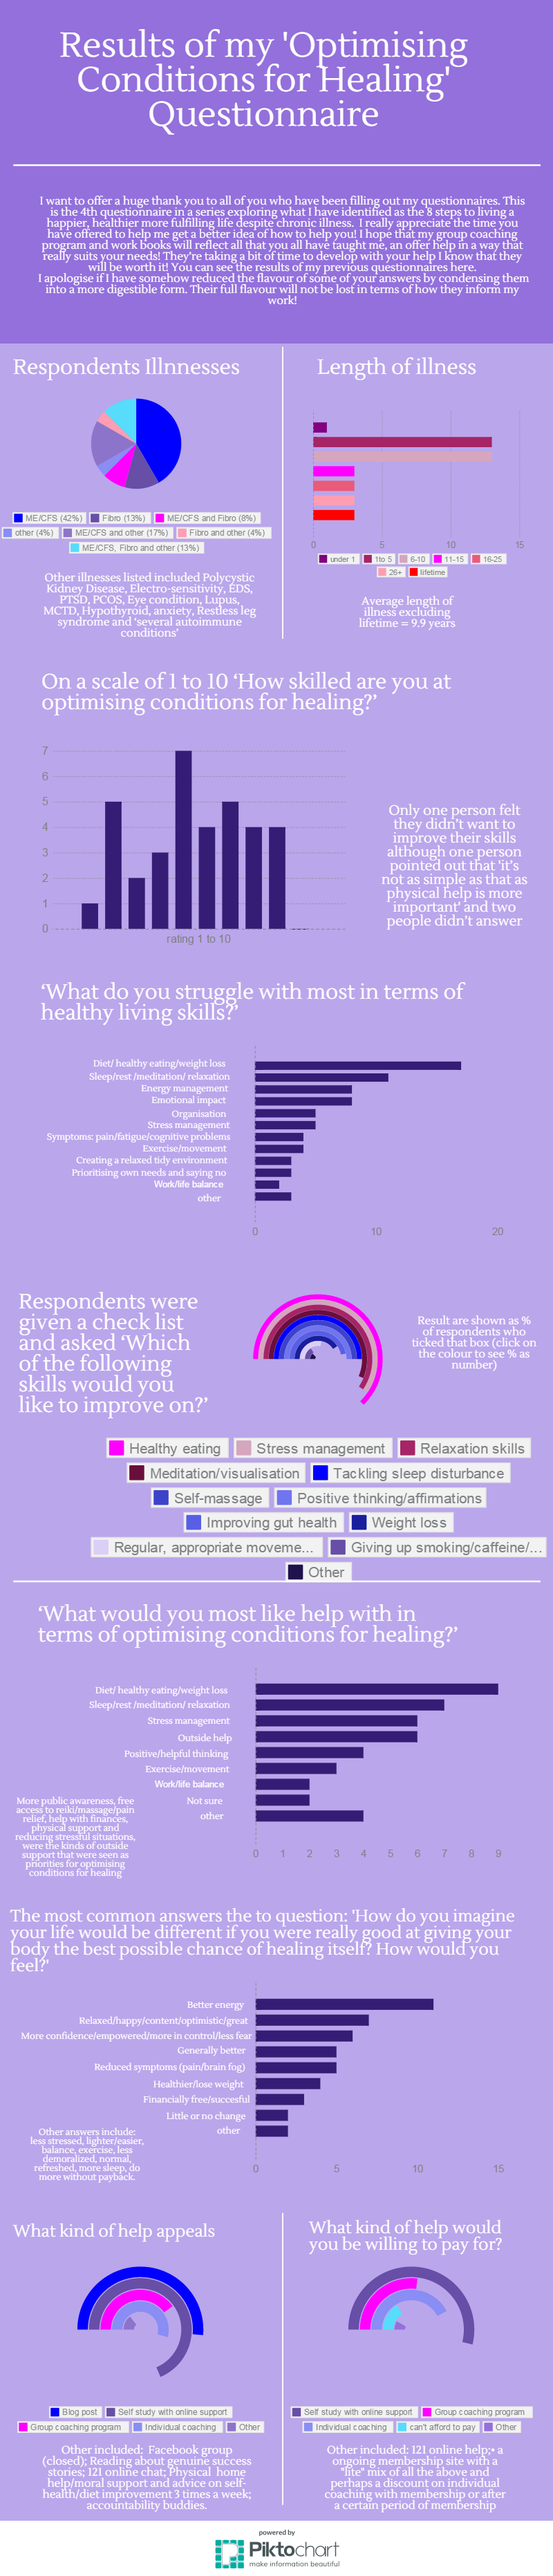 An infographic showing the results of my 'Optimising Conditions for Healing' Questionnaire